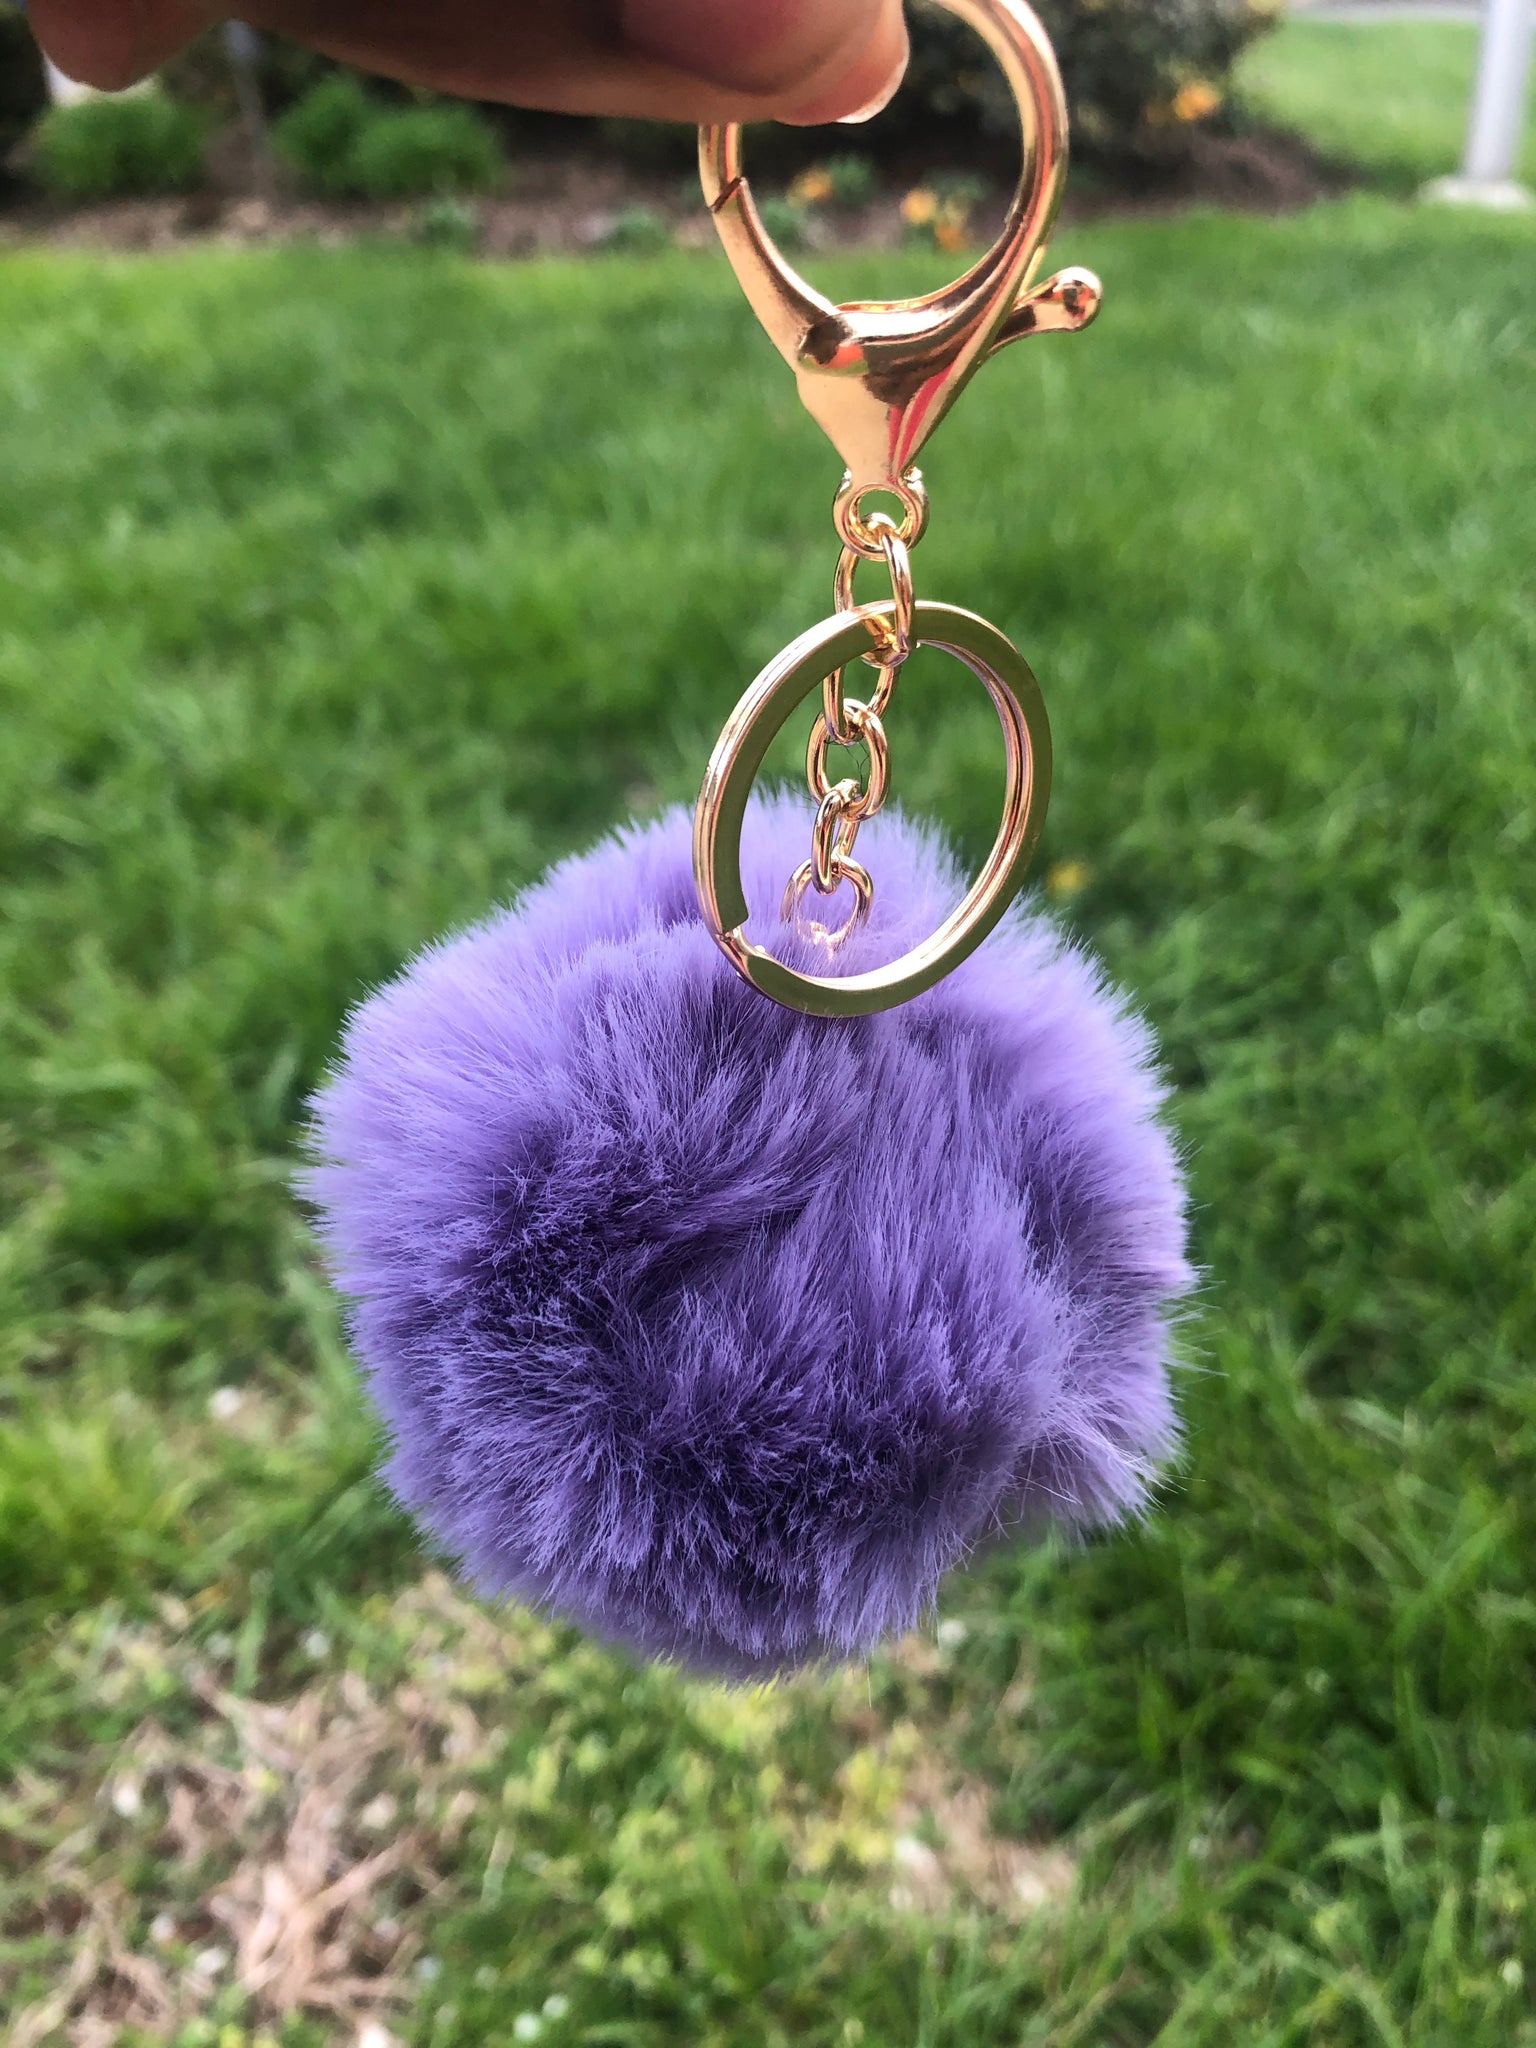 Cheetah / Leopard Puff Ball Key chains – The Lace Door Wholesale